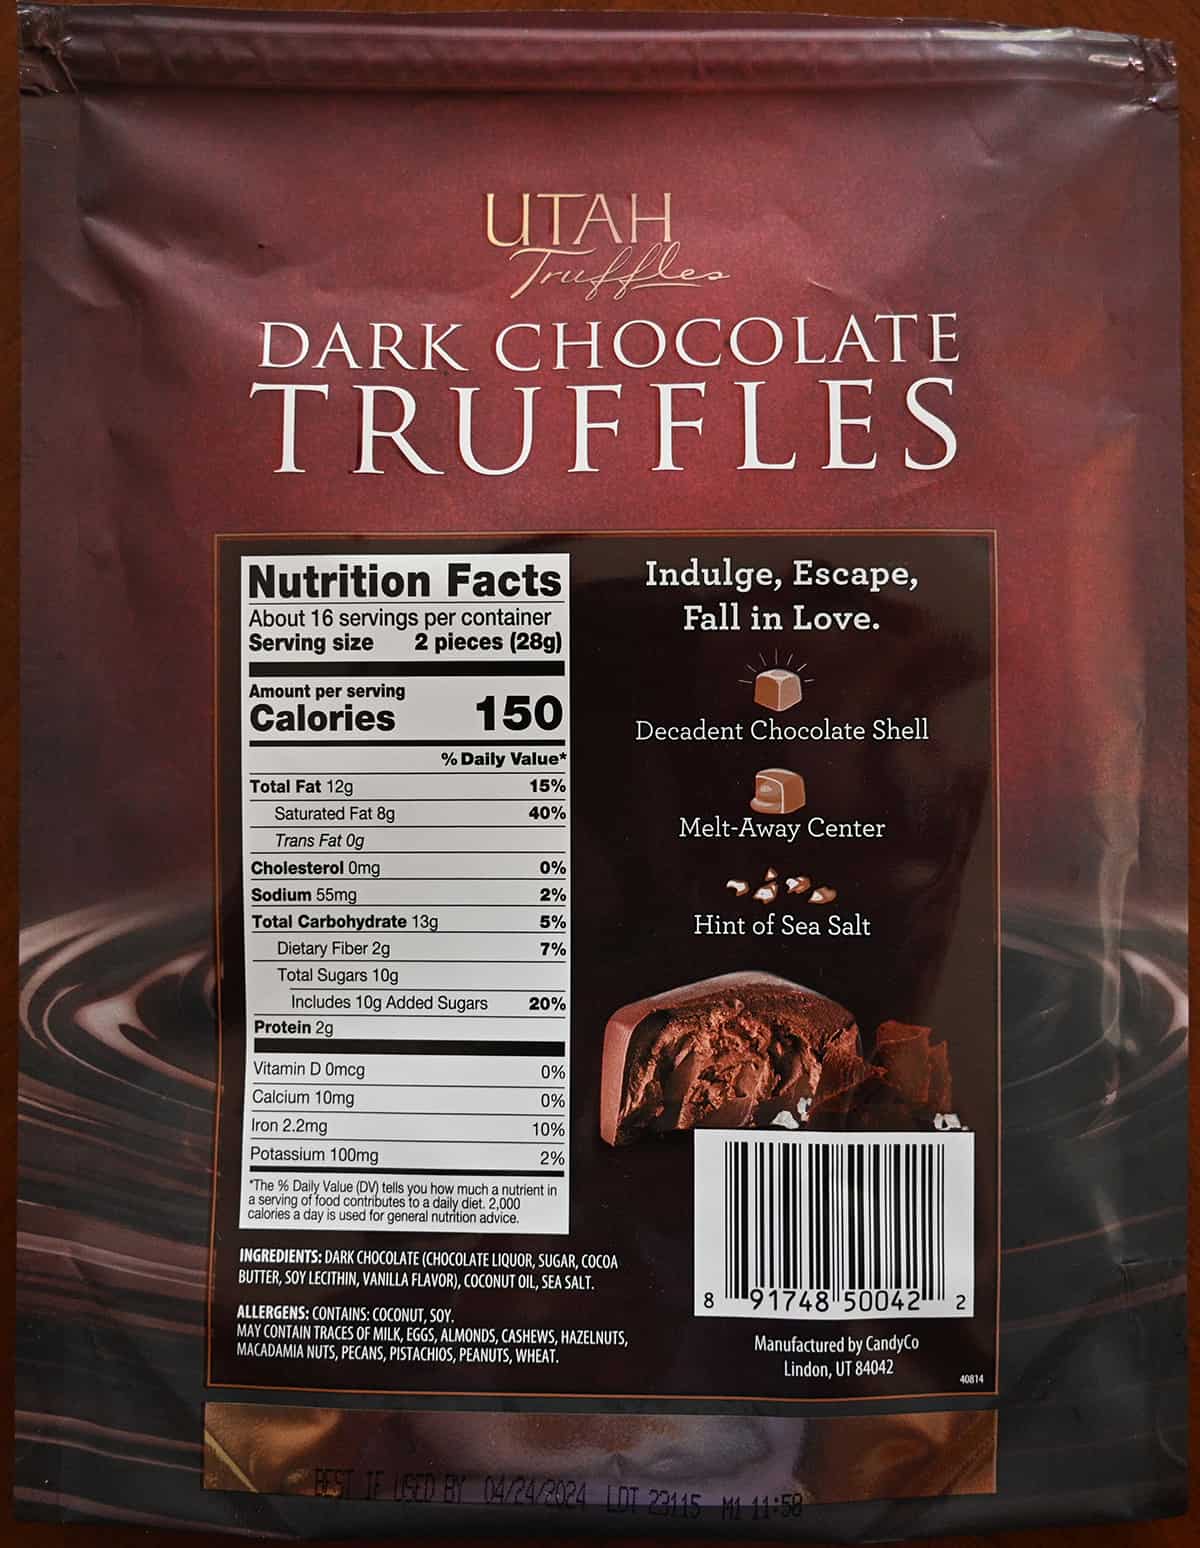 Image of the back of the bag of the dark chocolate sea salt truffles showing ingredients, nutrition facts and product description.